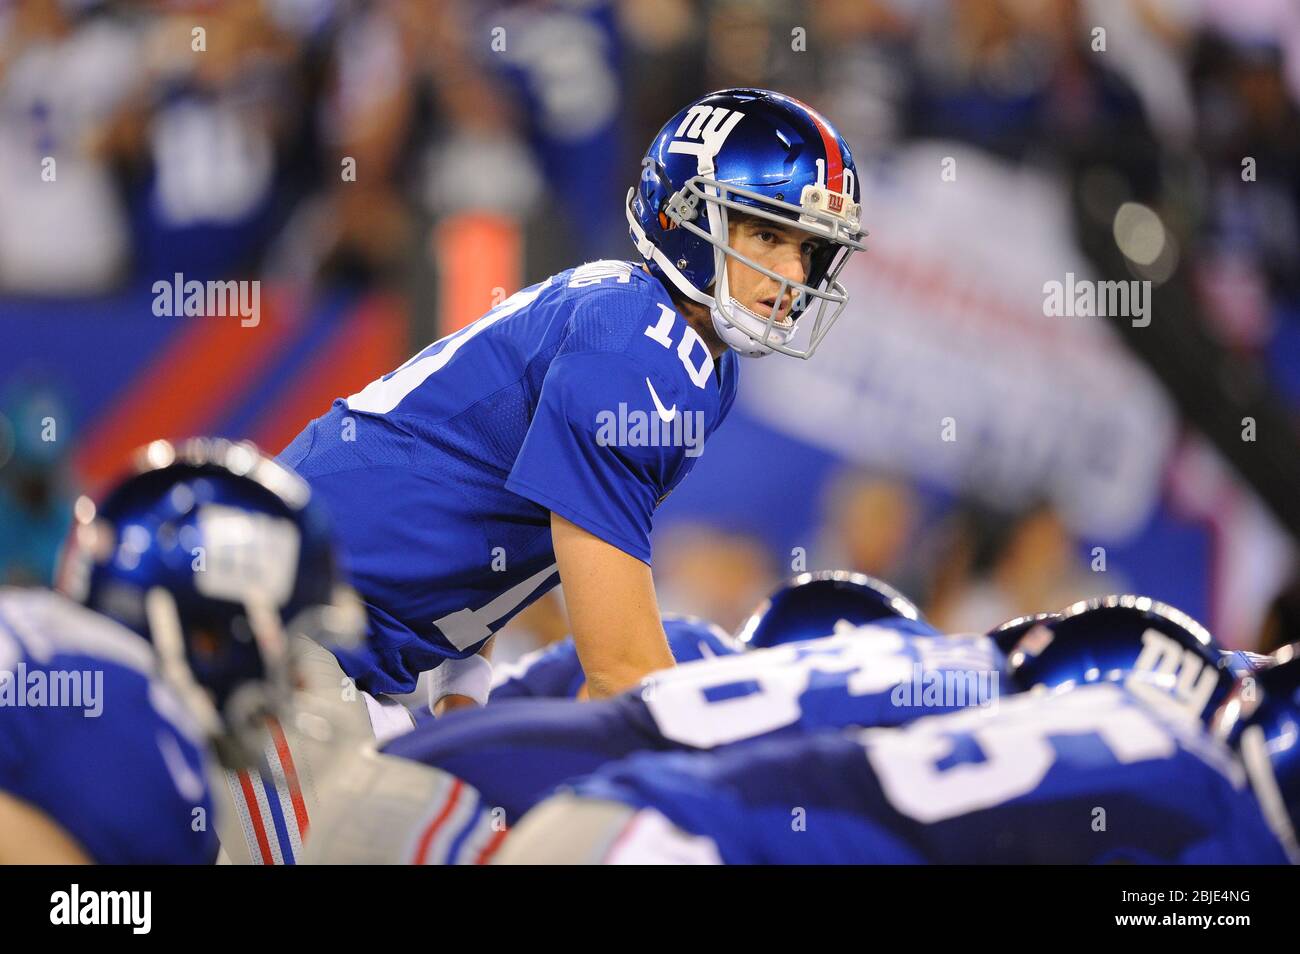 05 September 2012: New York Giants quarterback Eli Manning (10) during a week 1 NFL matchup between the Dallas Cowboys and New York Giants at Metlife Stock Photo